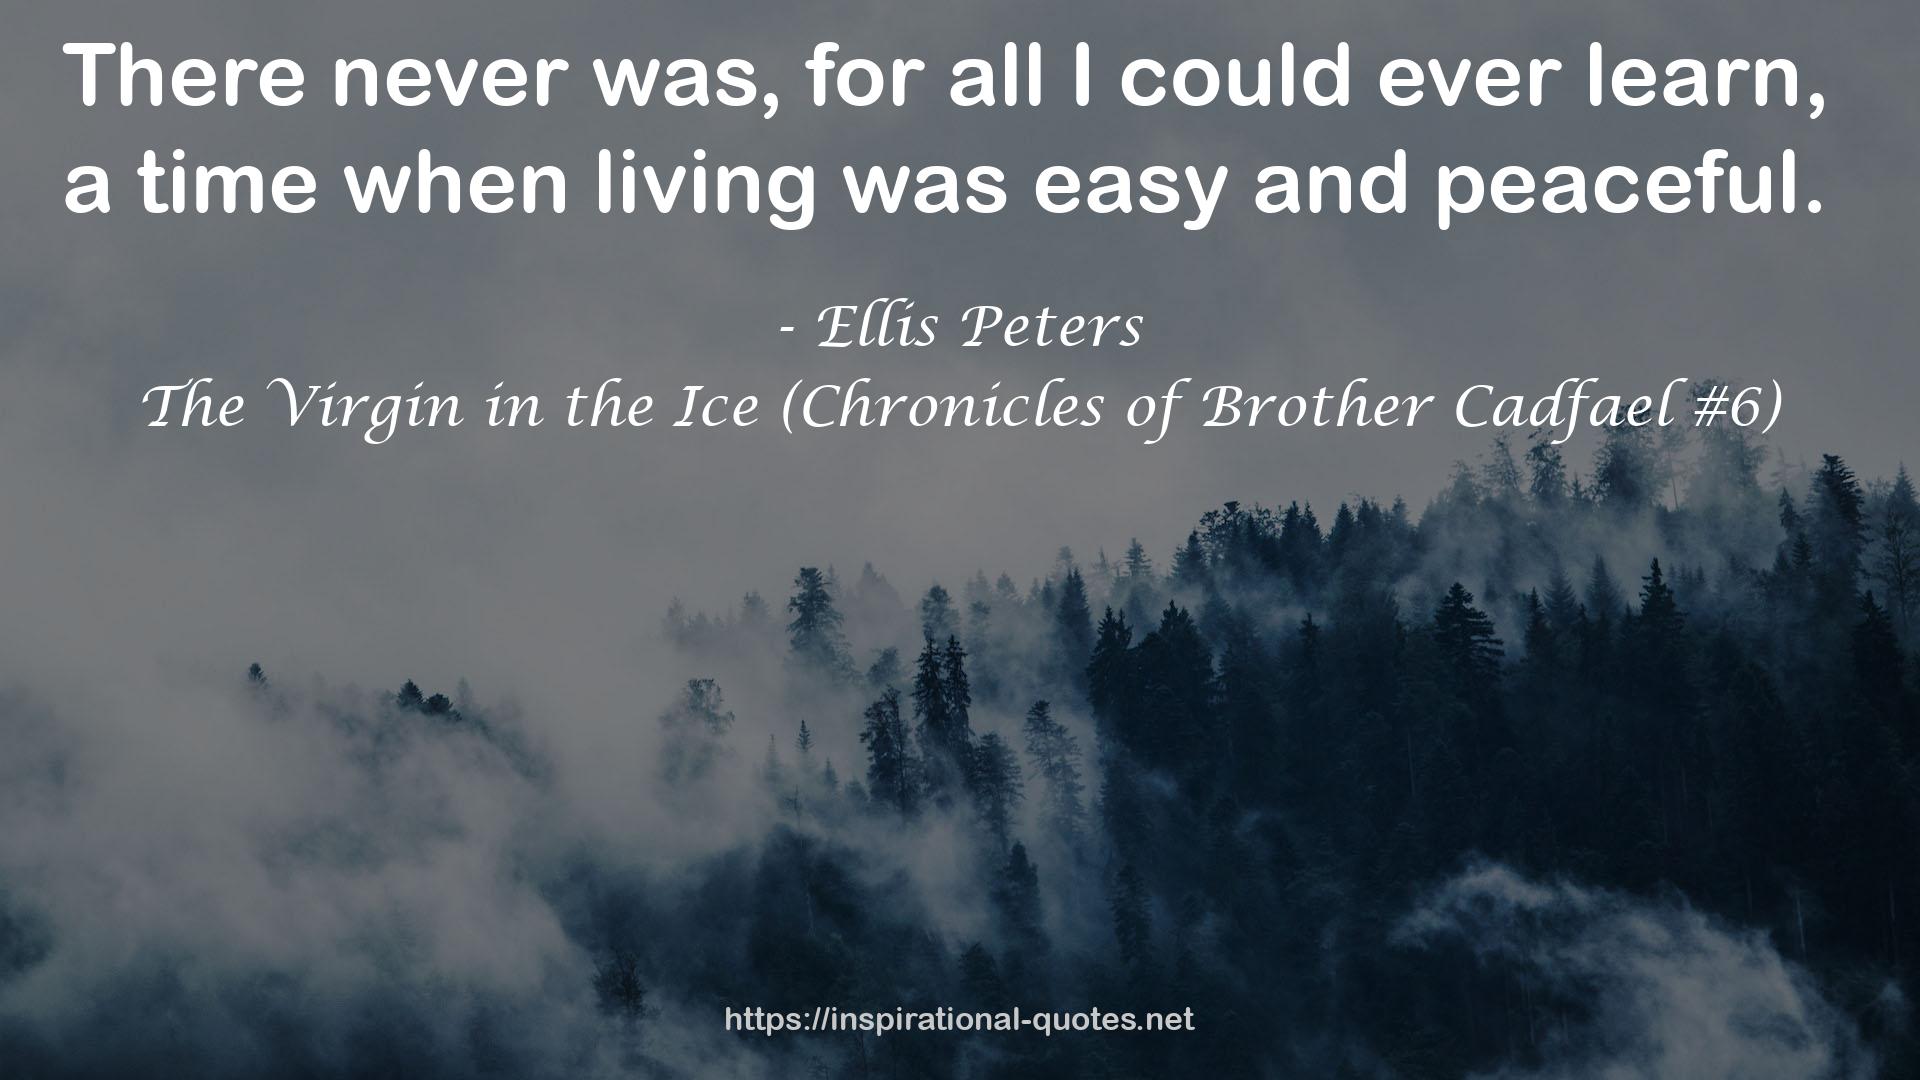 The Virgin in the Ice (Chronicles of Brother Cadfael #6) QUOTES